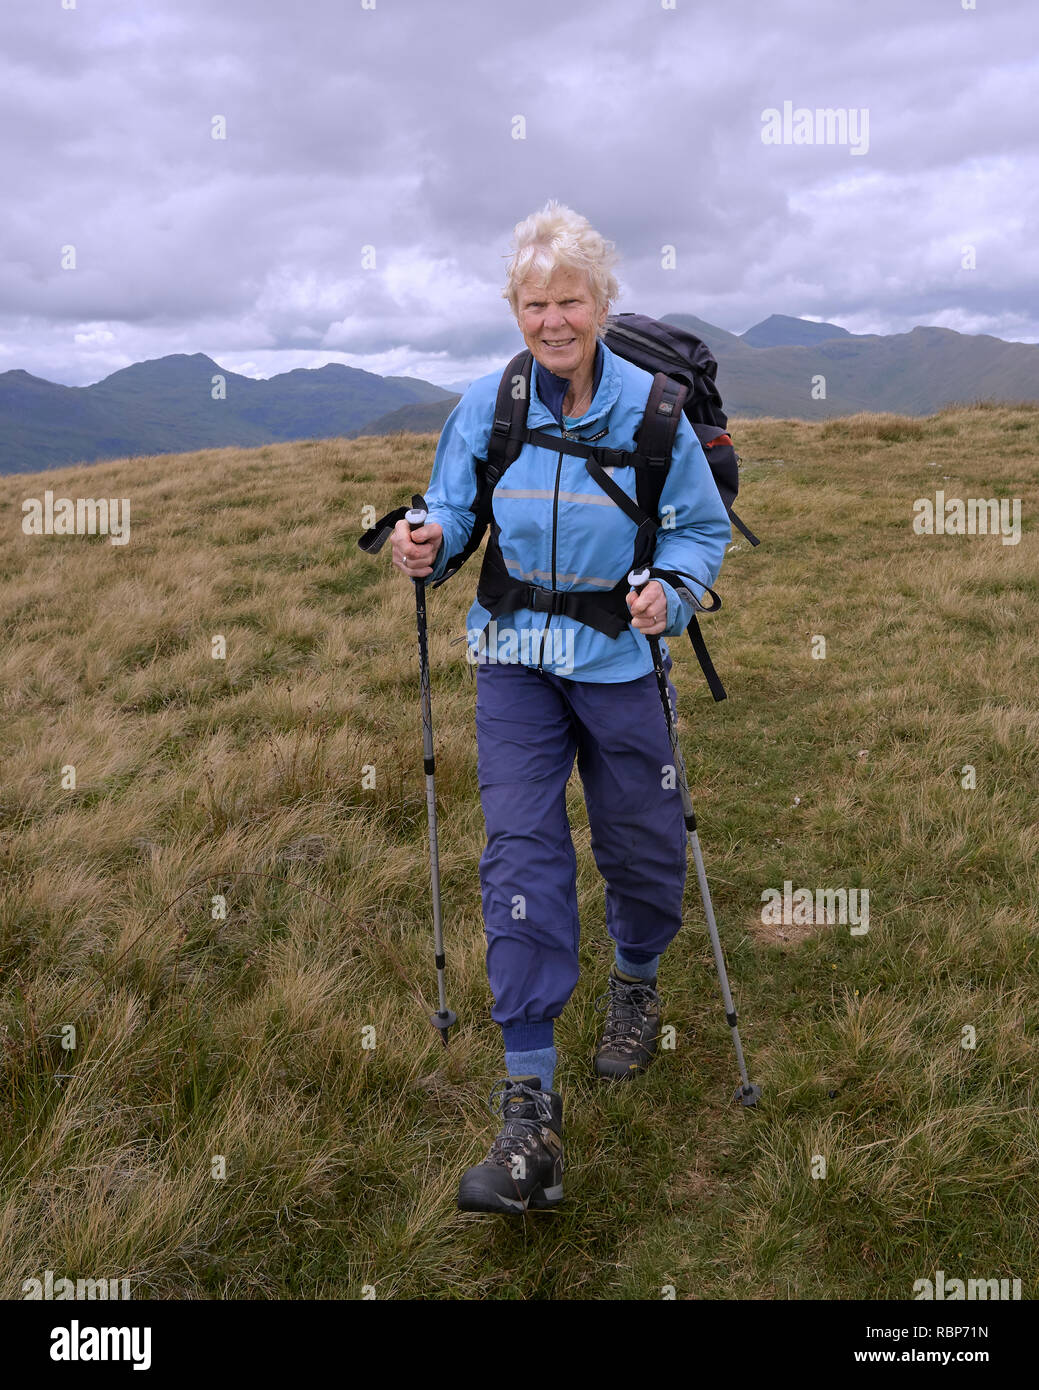 Woman hill walking with walking poles, dressed in blue.  Stob Fear-tomhais, Balquhidder, Stirling, Scotland Stock Photo